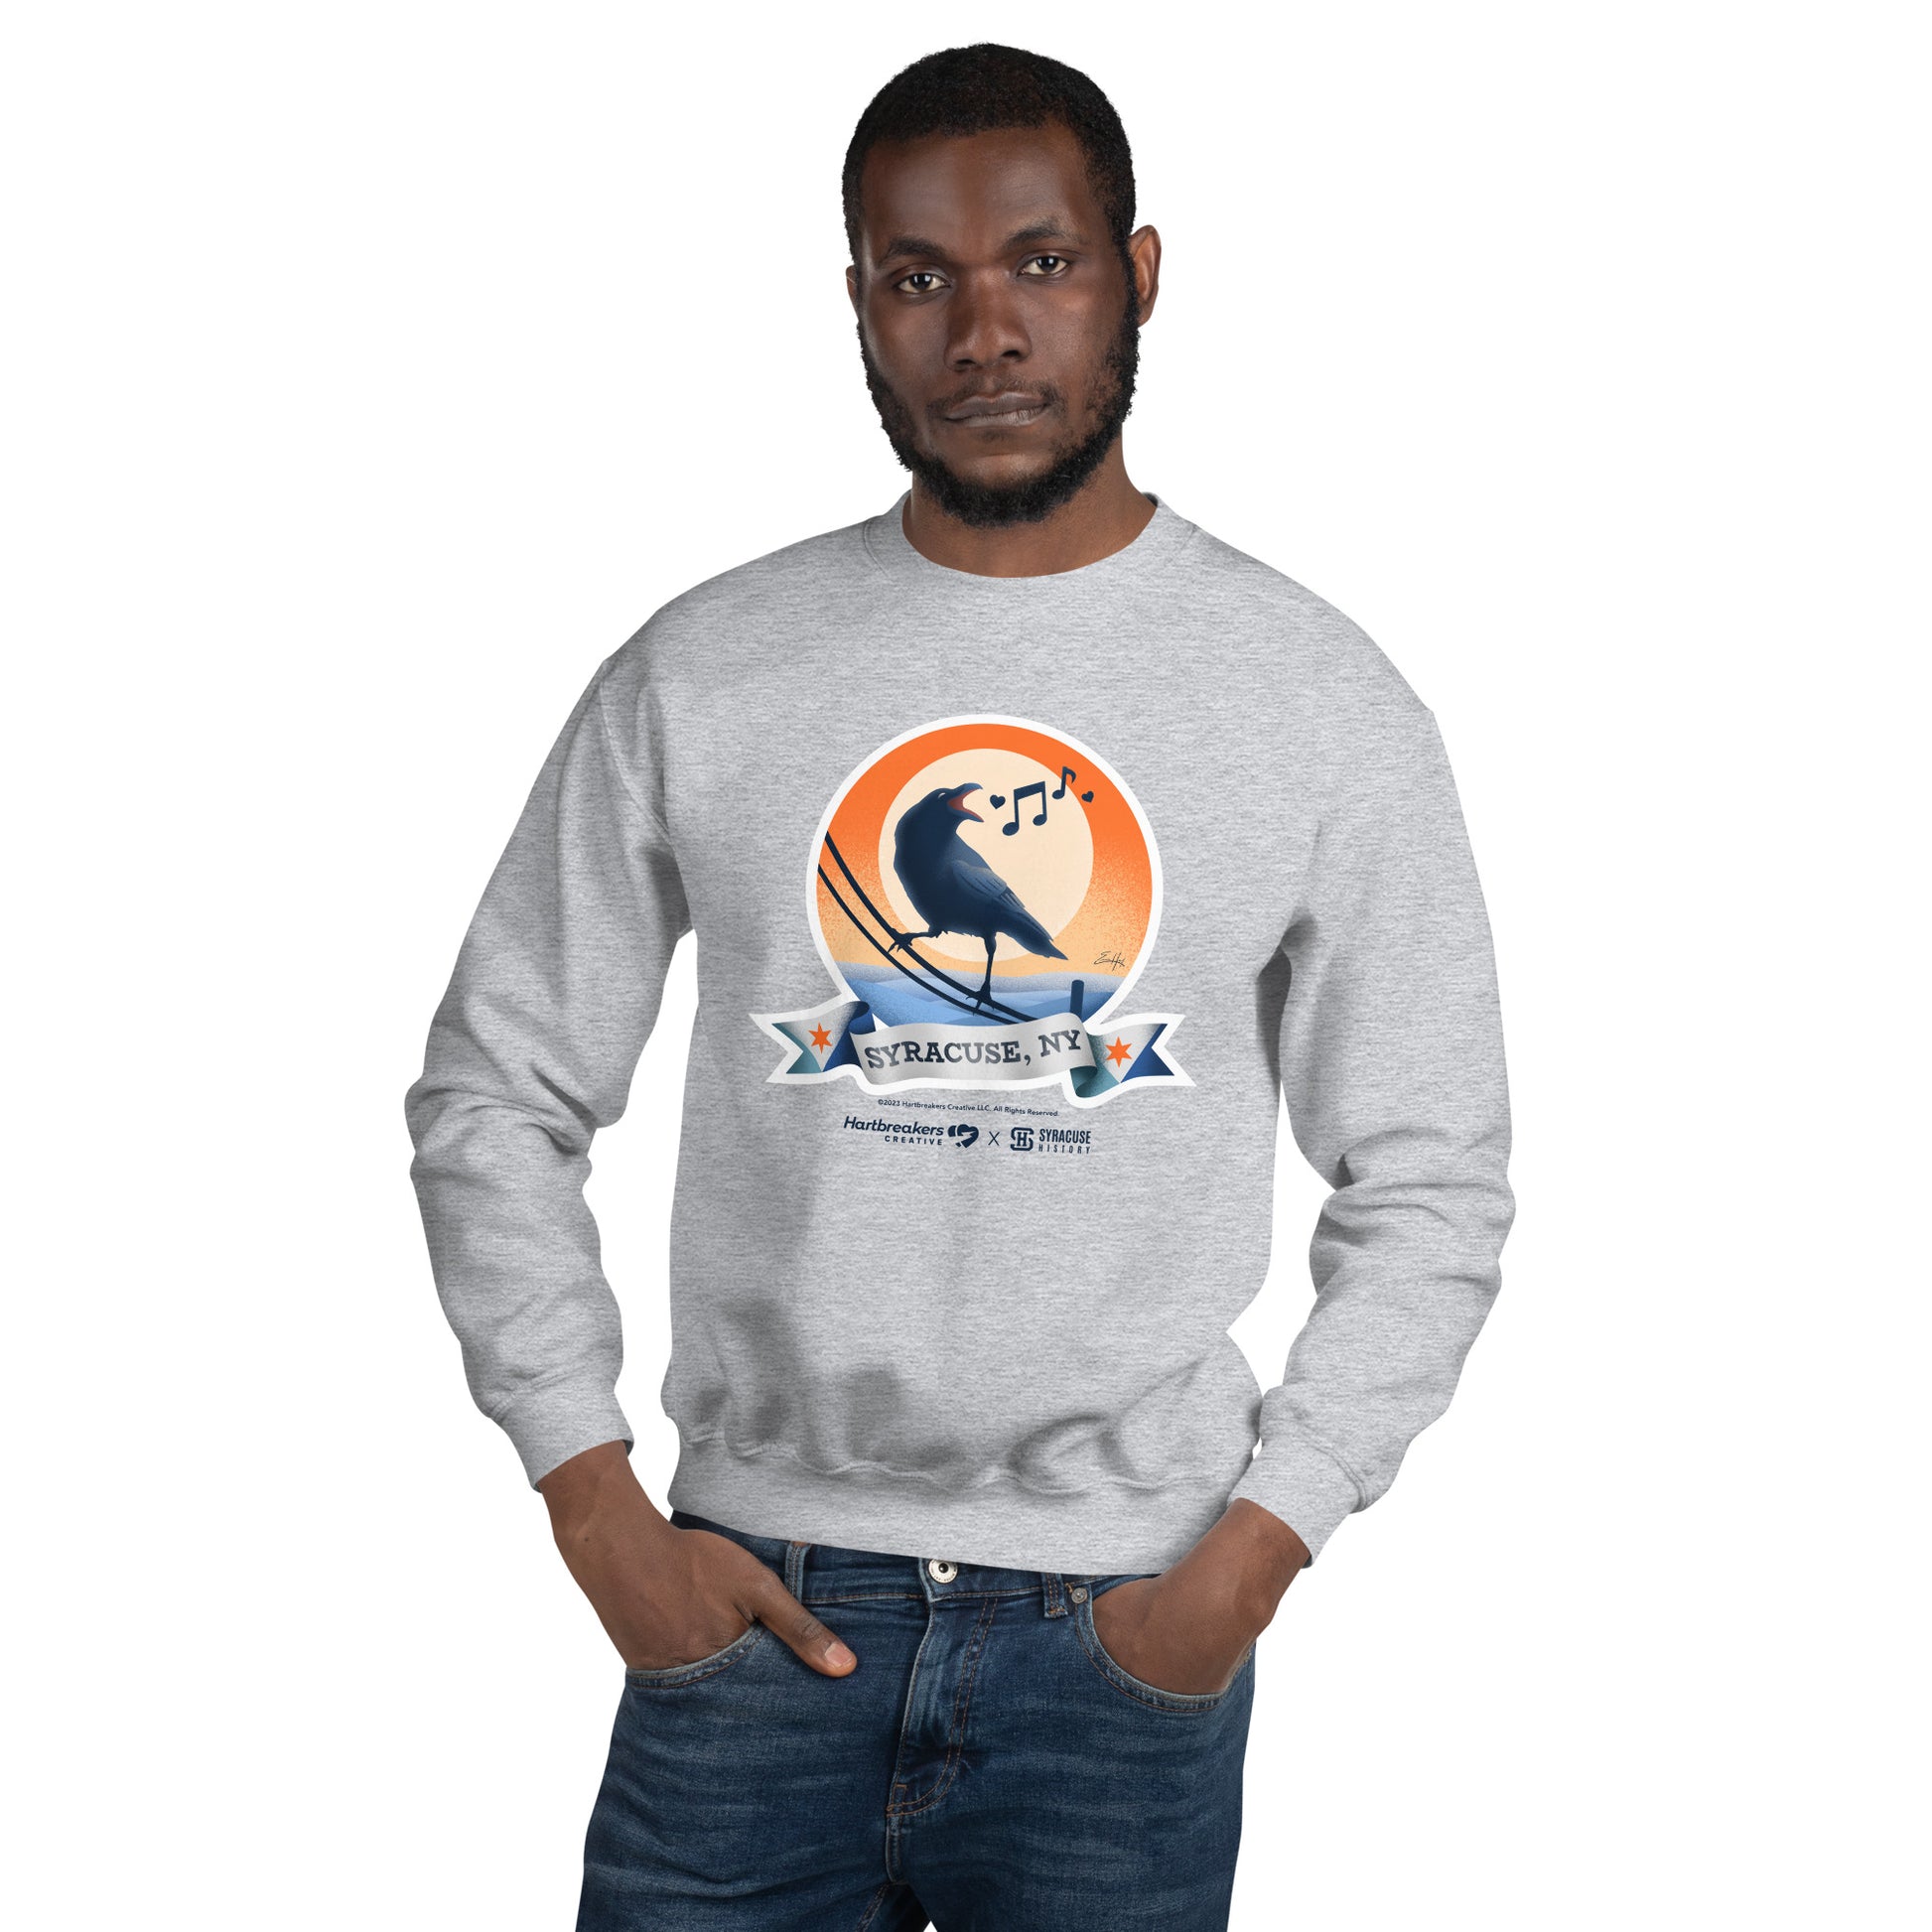 A man wearing a sport grey sweatshirt featuring an illustration of a crow on a telephone wire and a banner beneath it that says Syracuse, NY